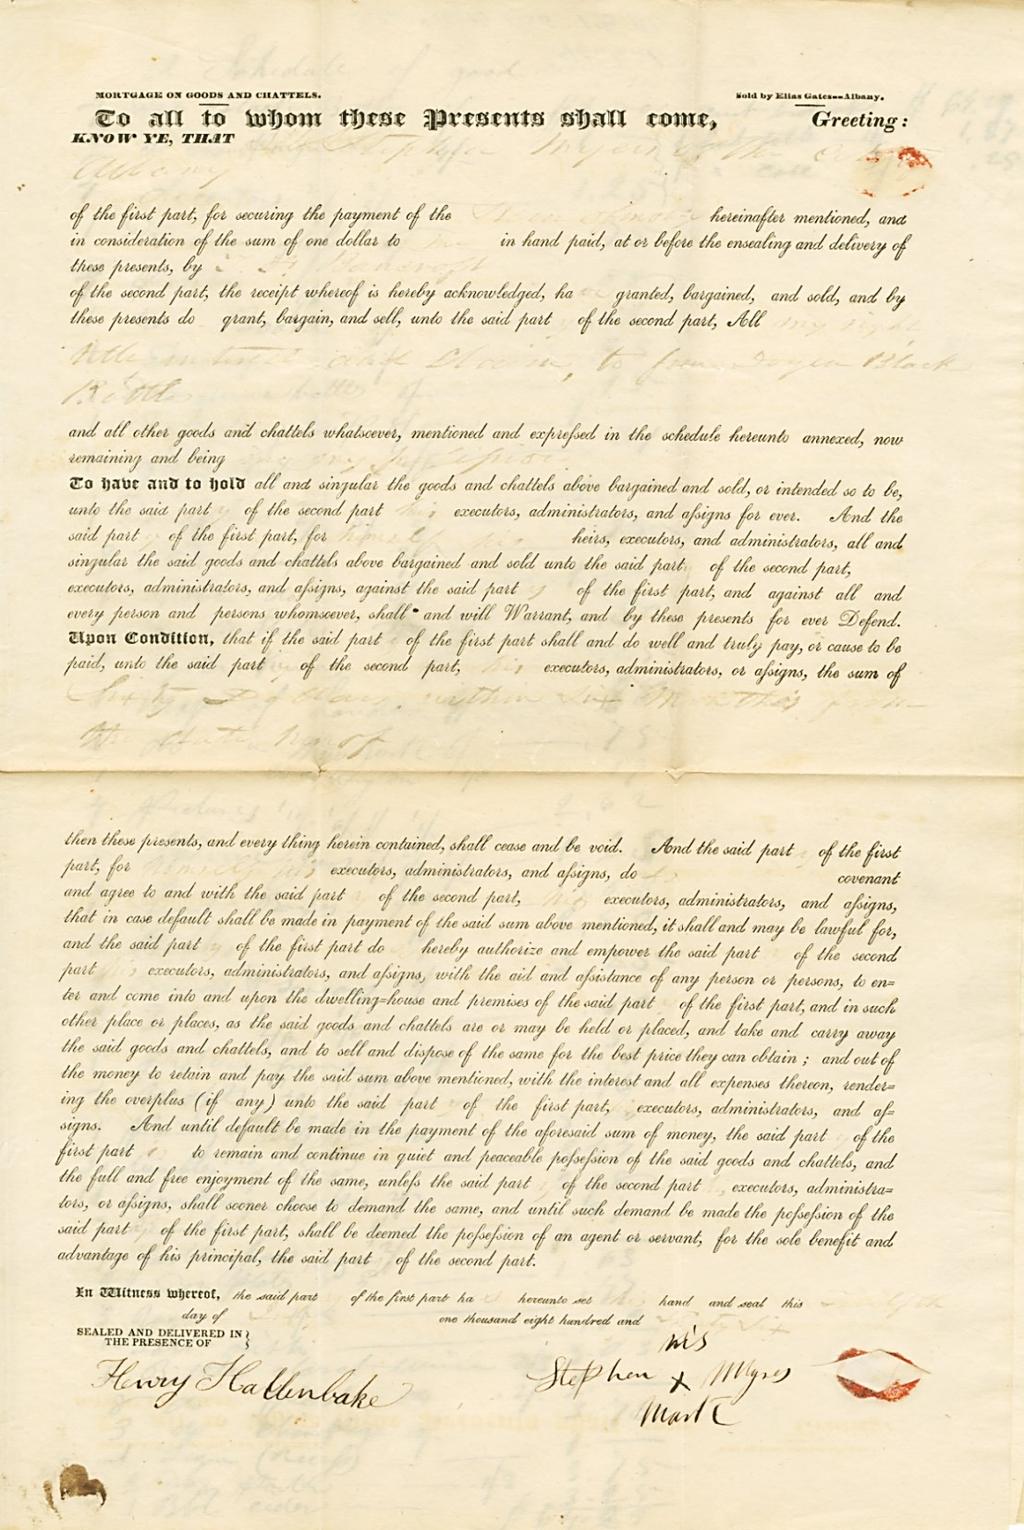 Chattel Mortgage 97-00734. Albany County Clerk, Chattel Mortgages, 1834-1837. File 816: Stephen Myers to T.F. Bancroft, Mortgage of Personal Property, 1836.